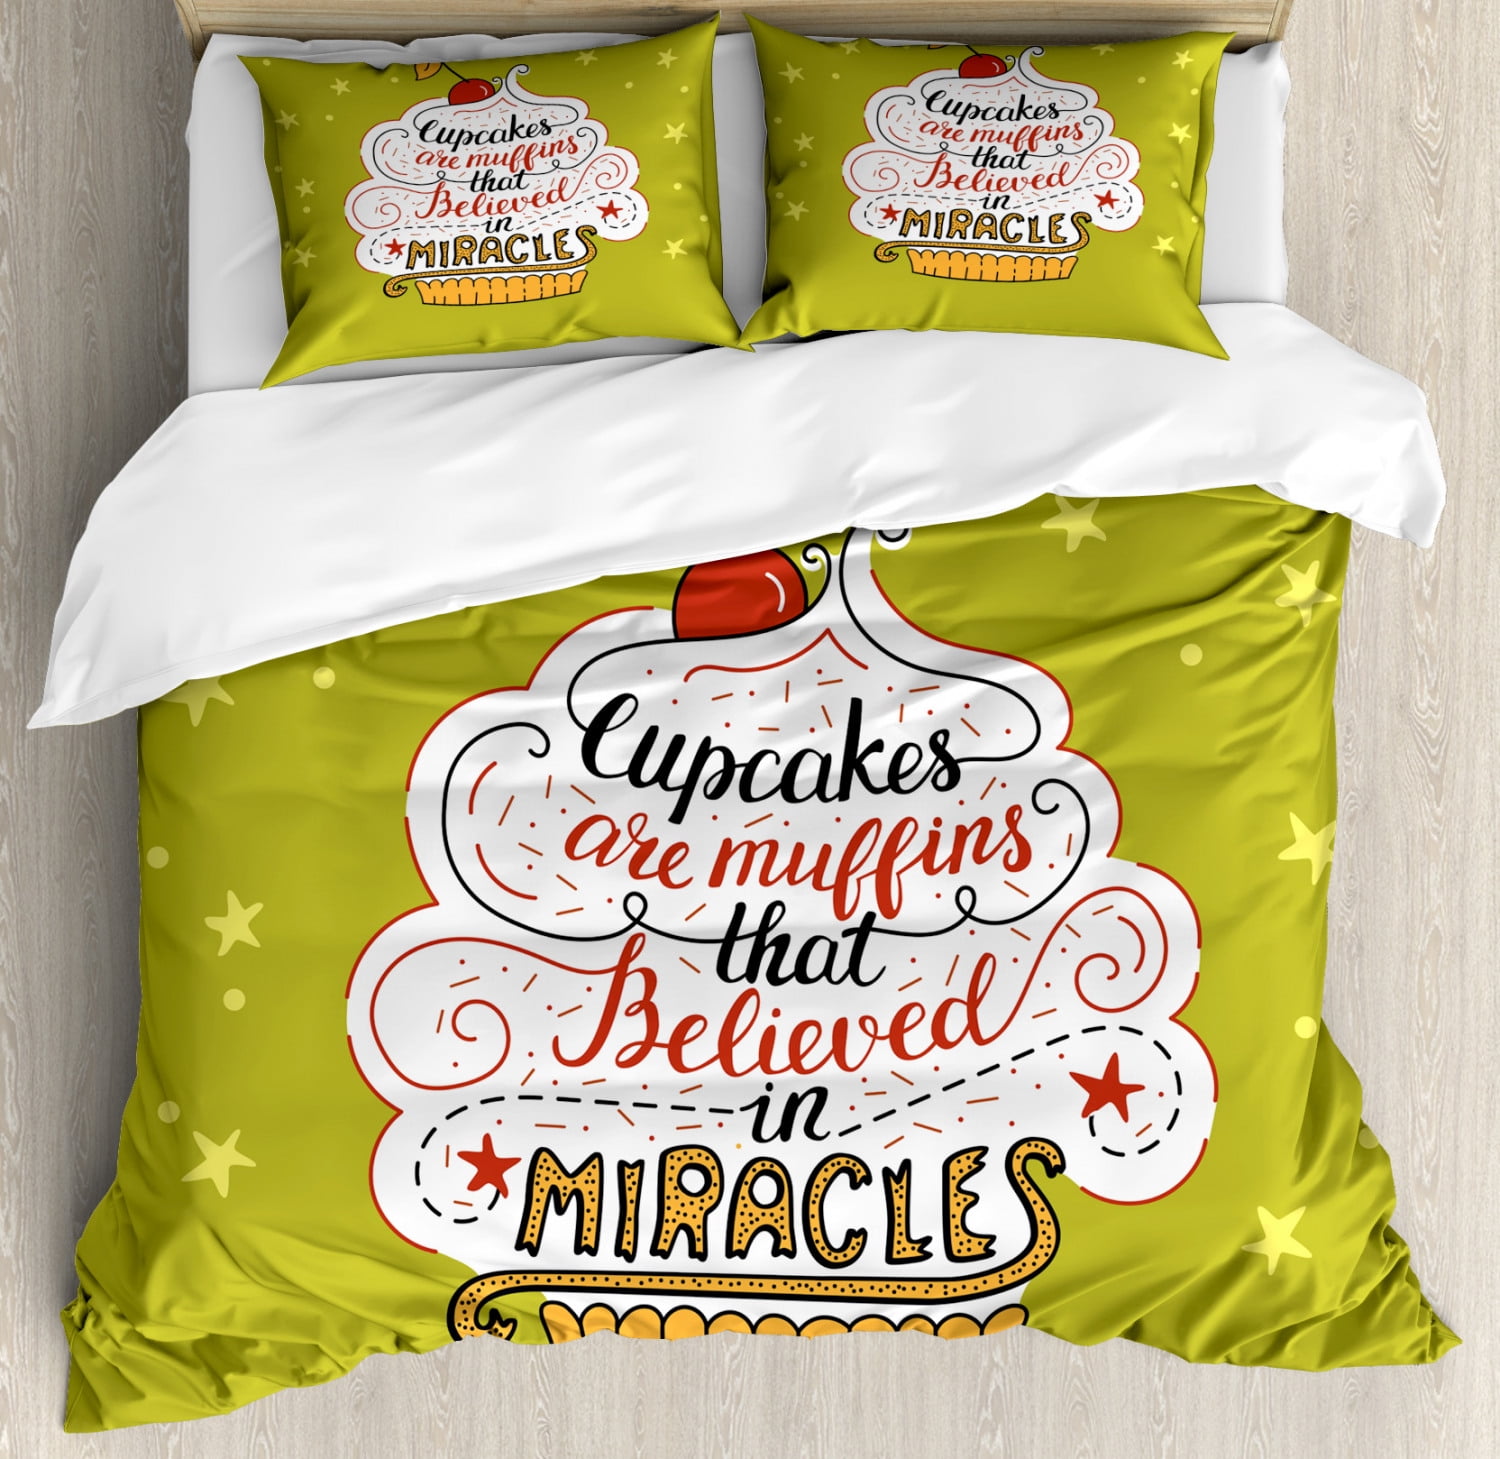 Cupcake Duvet Cover Set King Size Cupcakes Are Muffins That